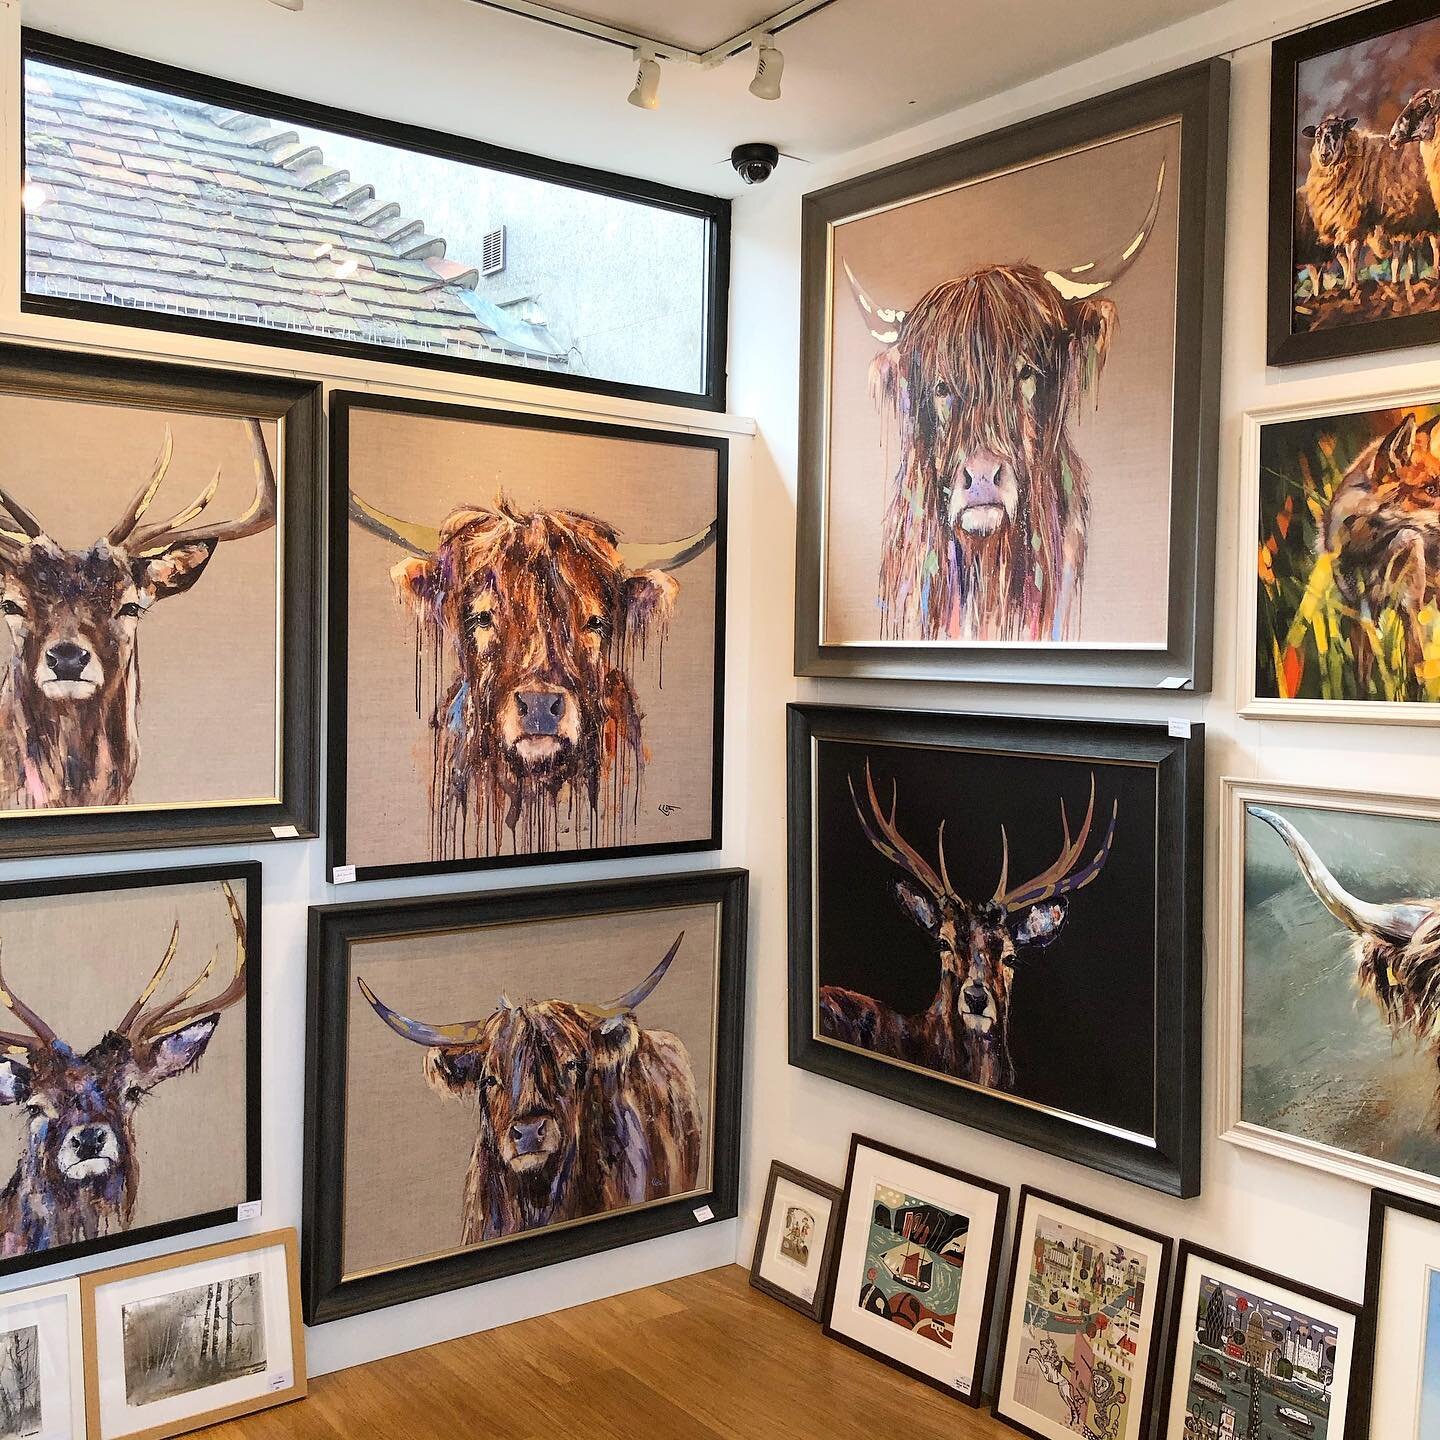 We&rsquo;ve got some lovely new framed animal prints by Louise Luton in the gallery!